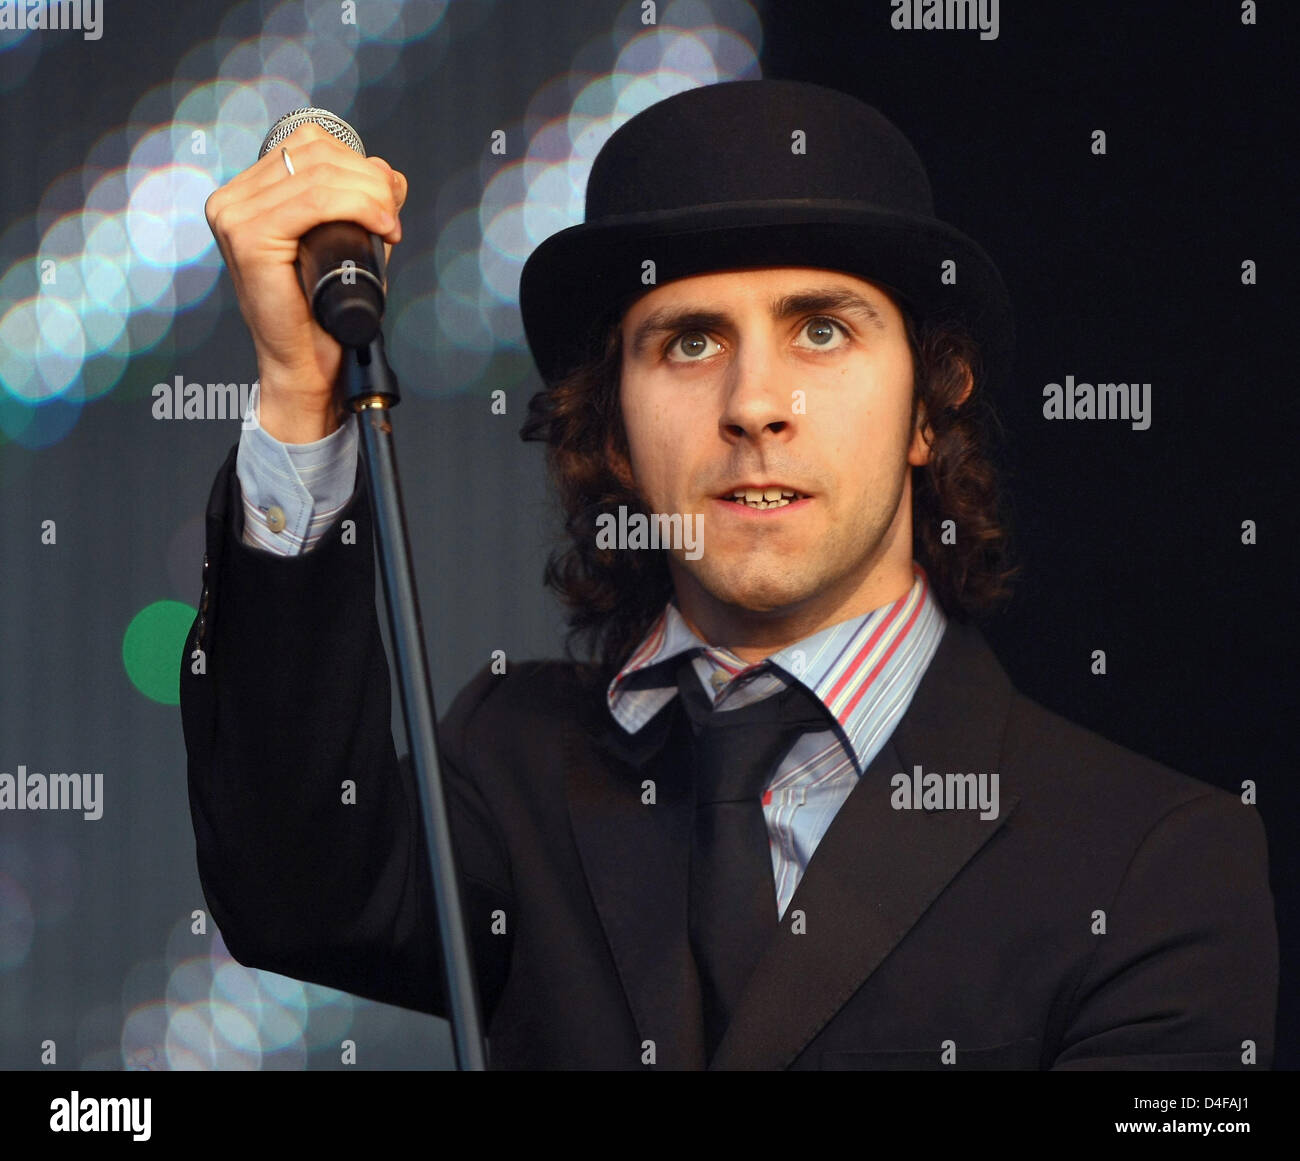 Lead singer of the British band 'Maximo Park' Paul Smith performs at the  Southside Festival 2008 in Neuhausen ob Eck, Germany, 22 June 2008. 45,000  visitors attended the three-day music festival. Styles